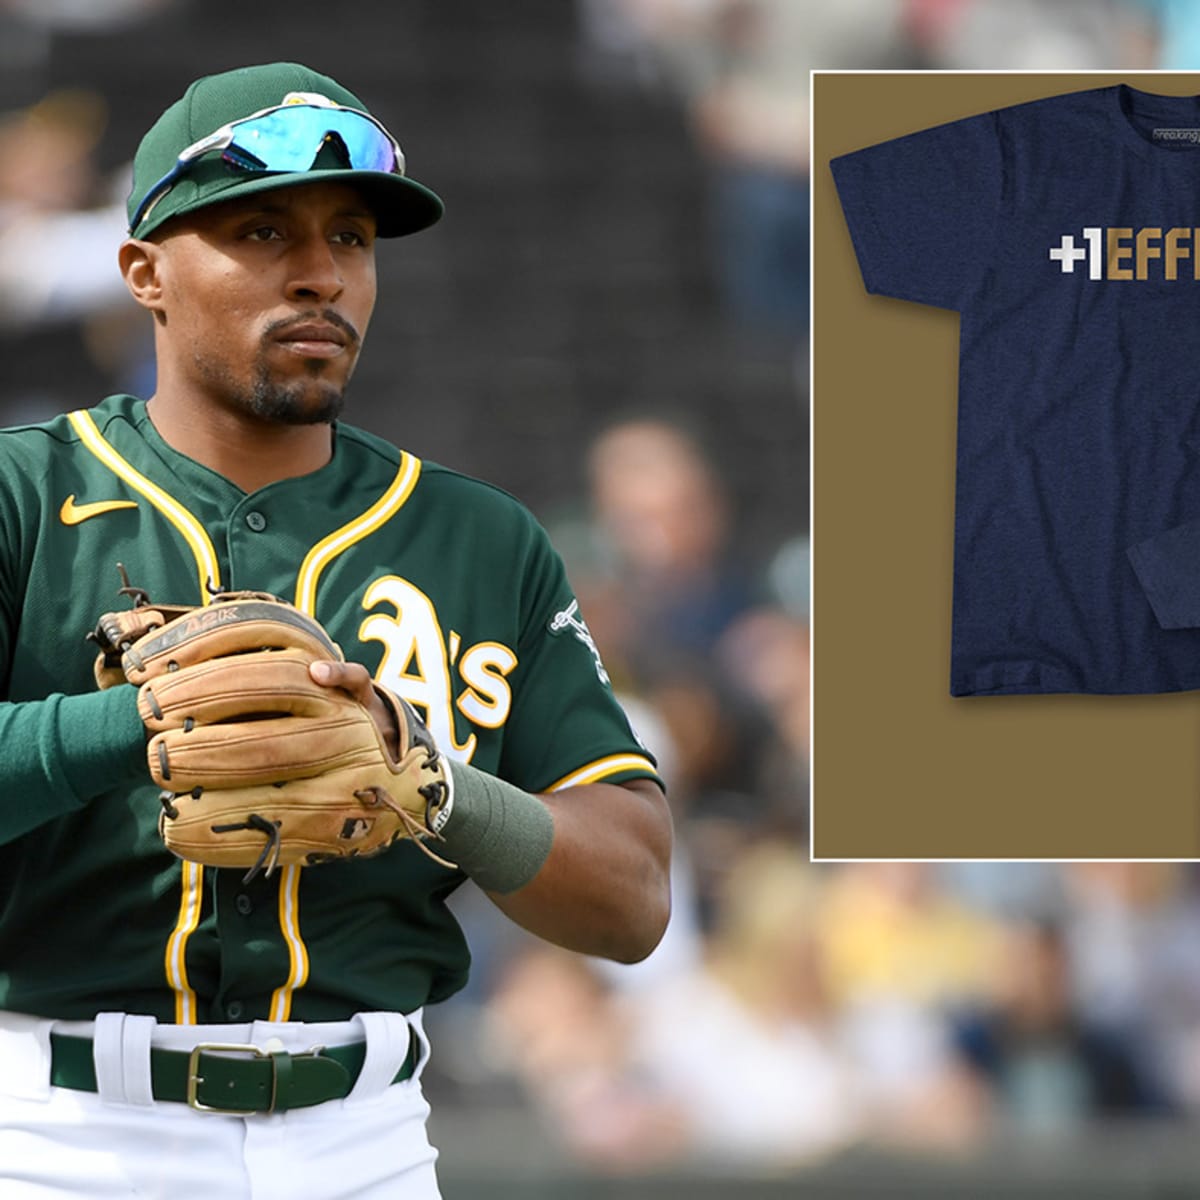 Tony Kemp nominated by Oakland A's for Roberto Clemente award